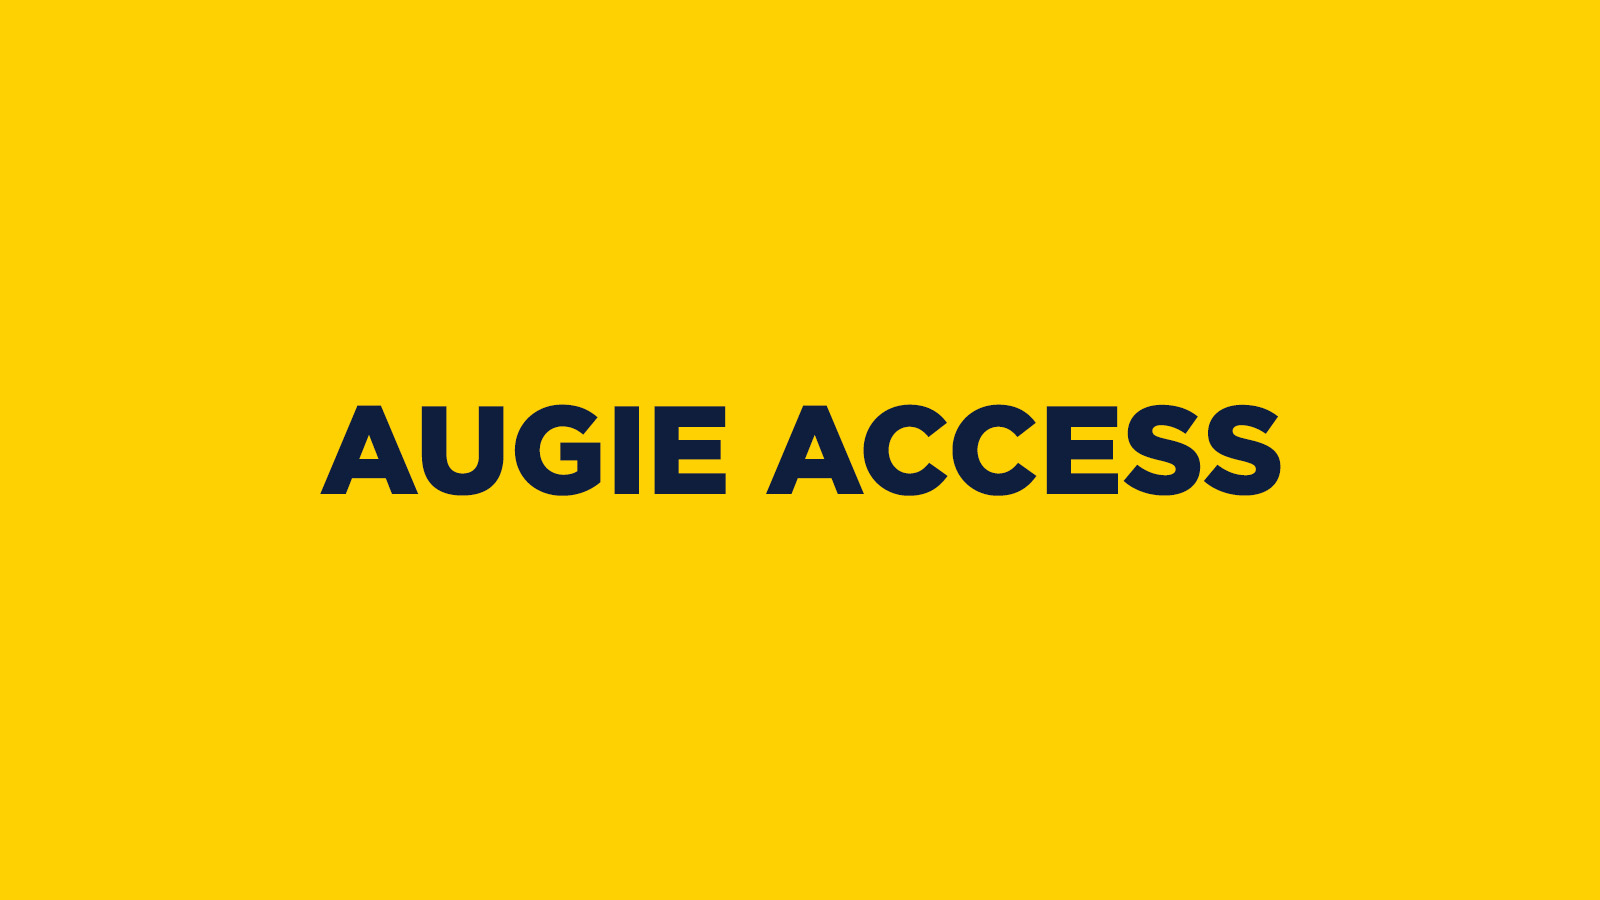 AUGIE ACCESS